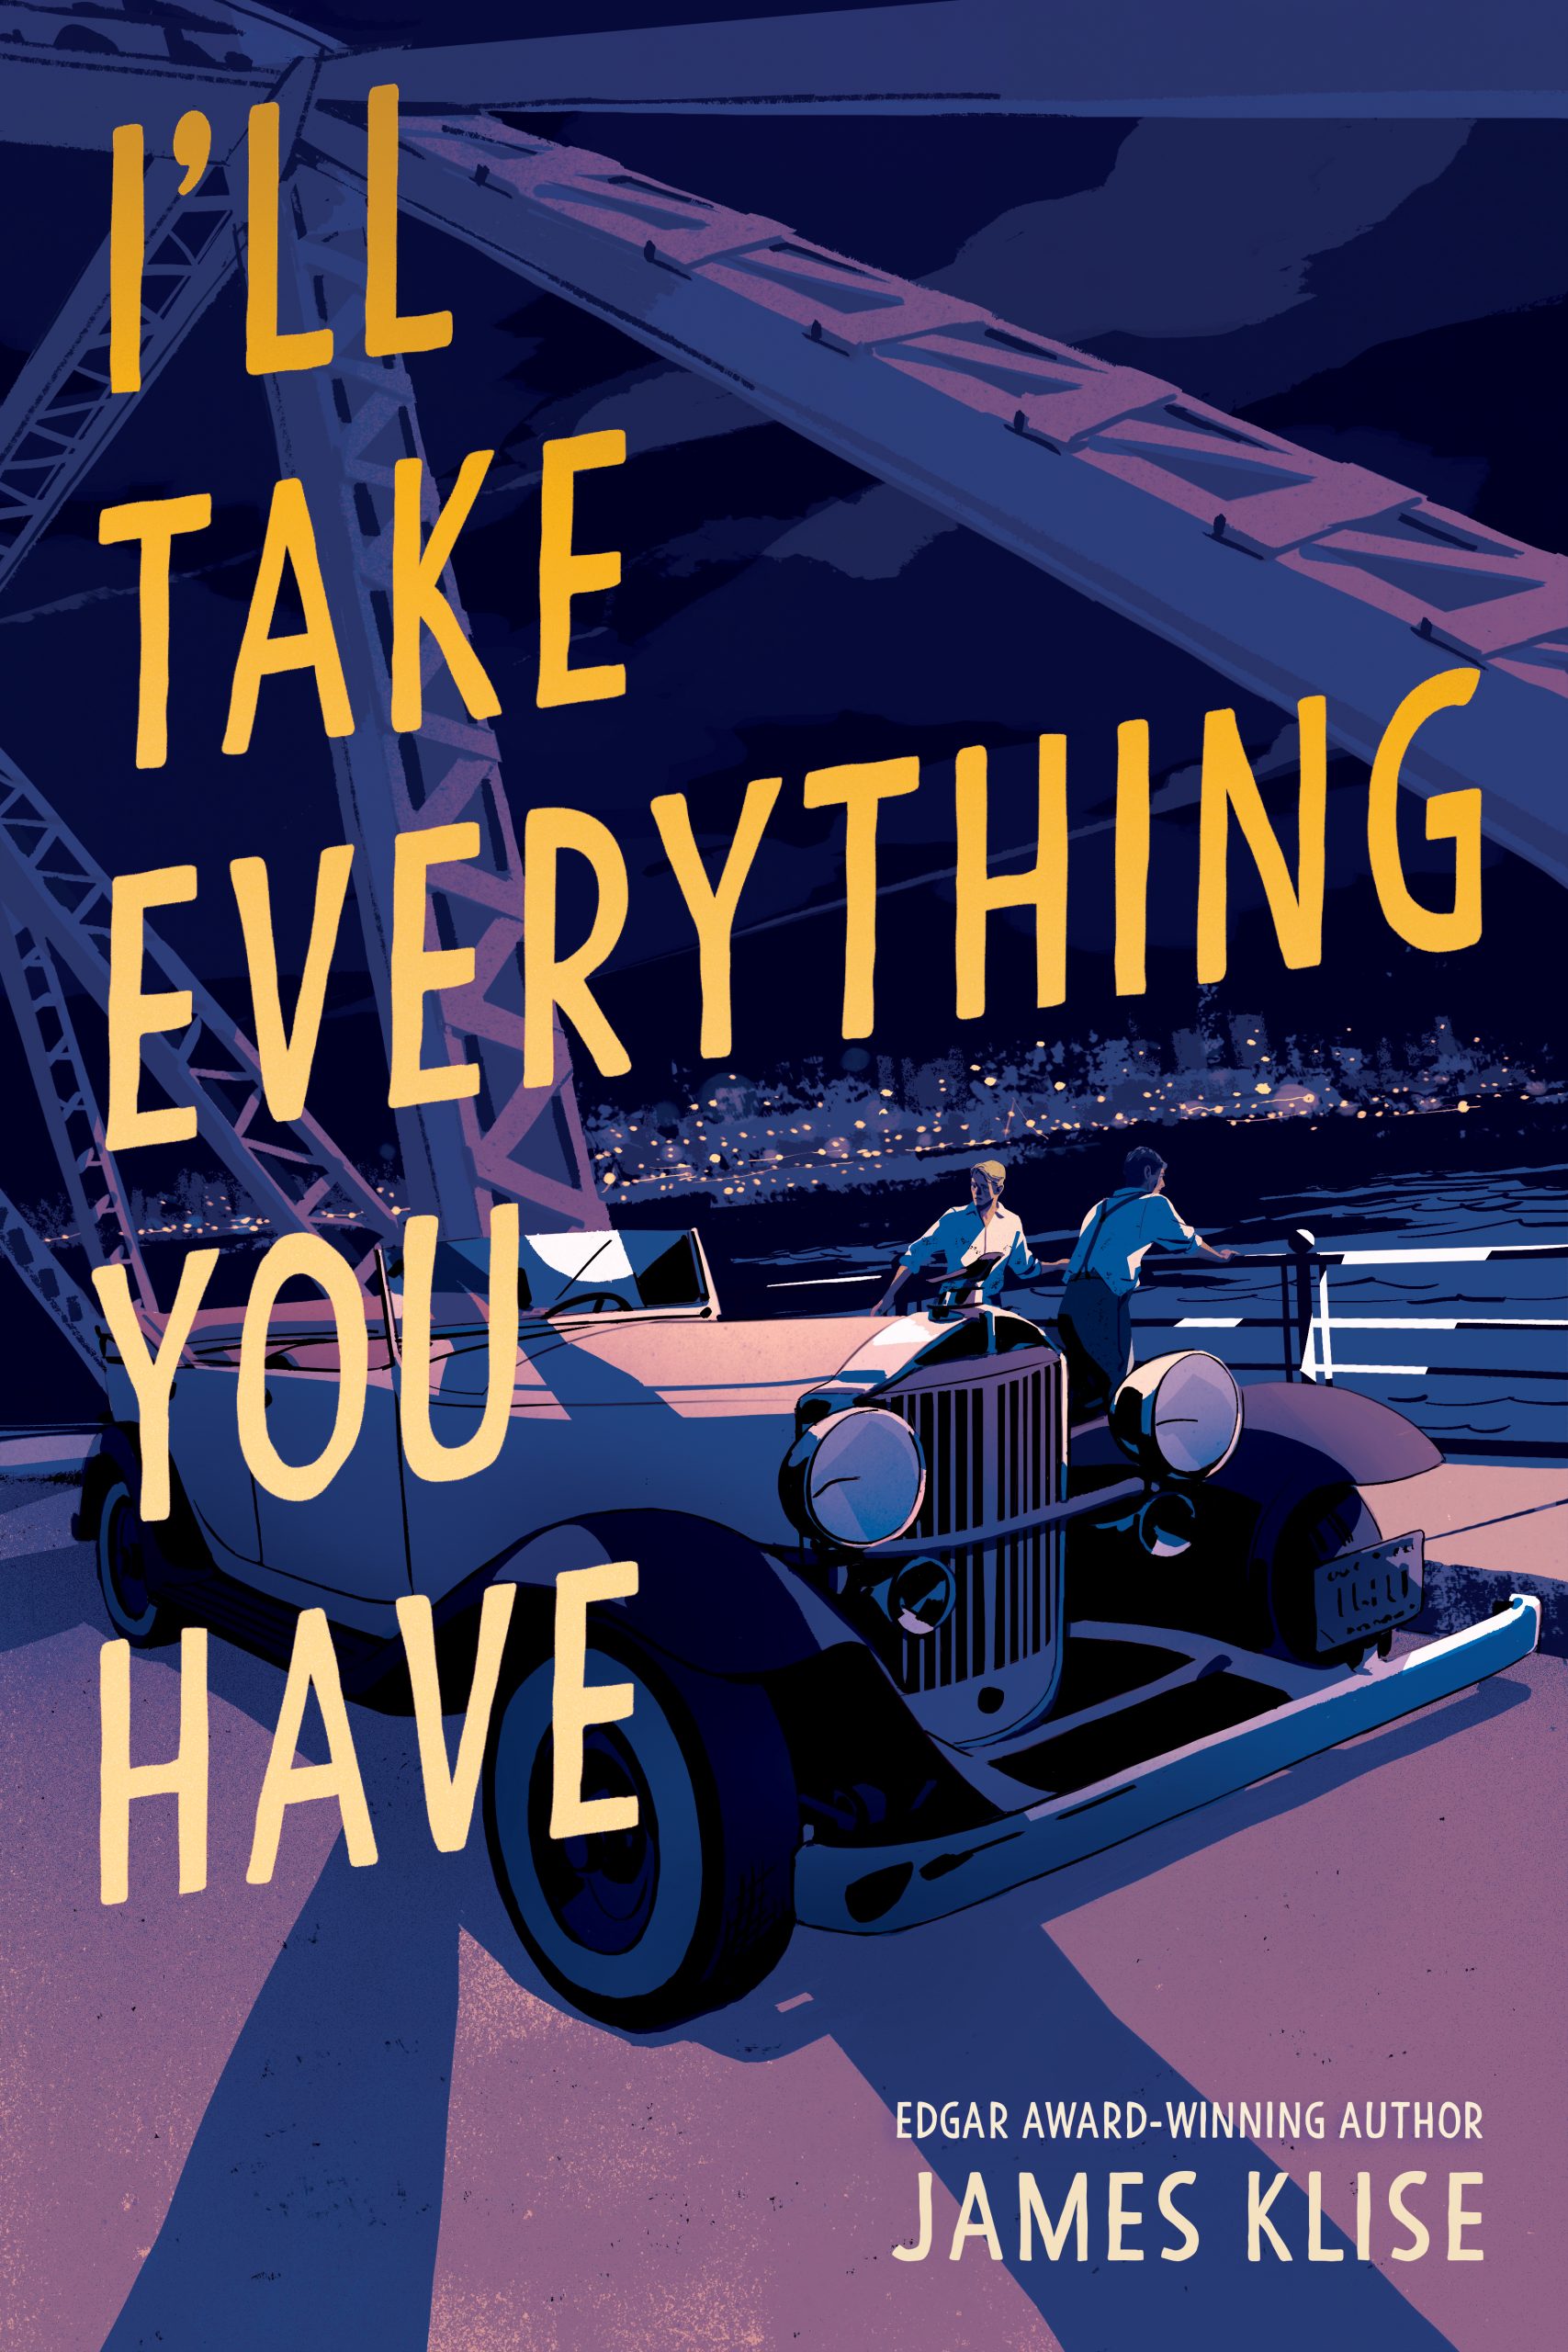 Spotlight on I’ll Take Everything You Have (James Klise), Excerpt Plus Giveaway! ~US Only